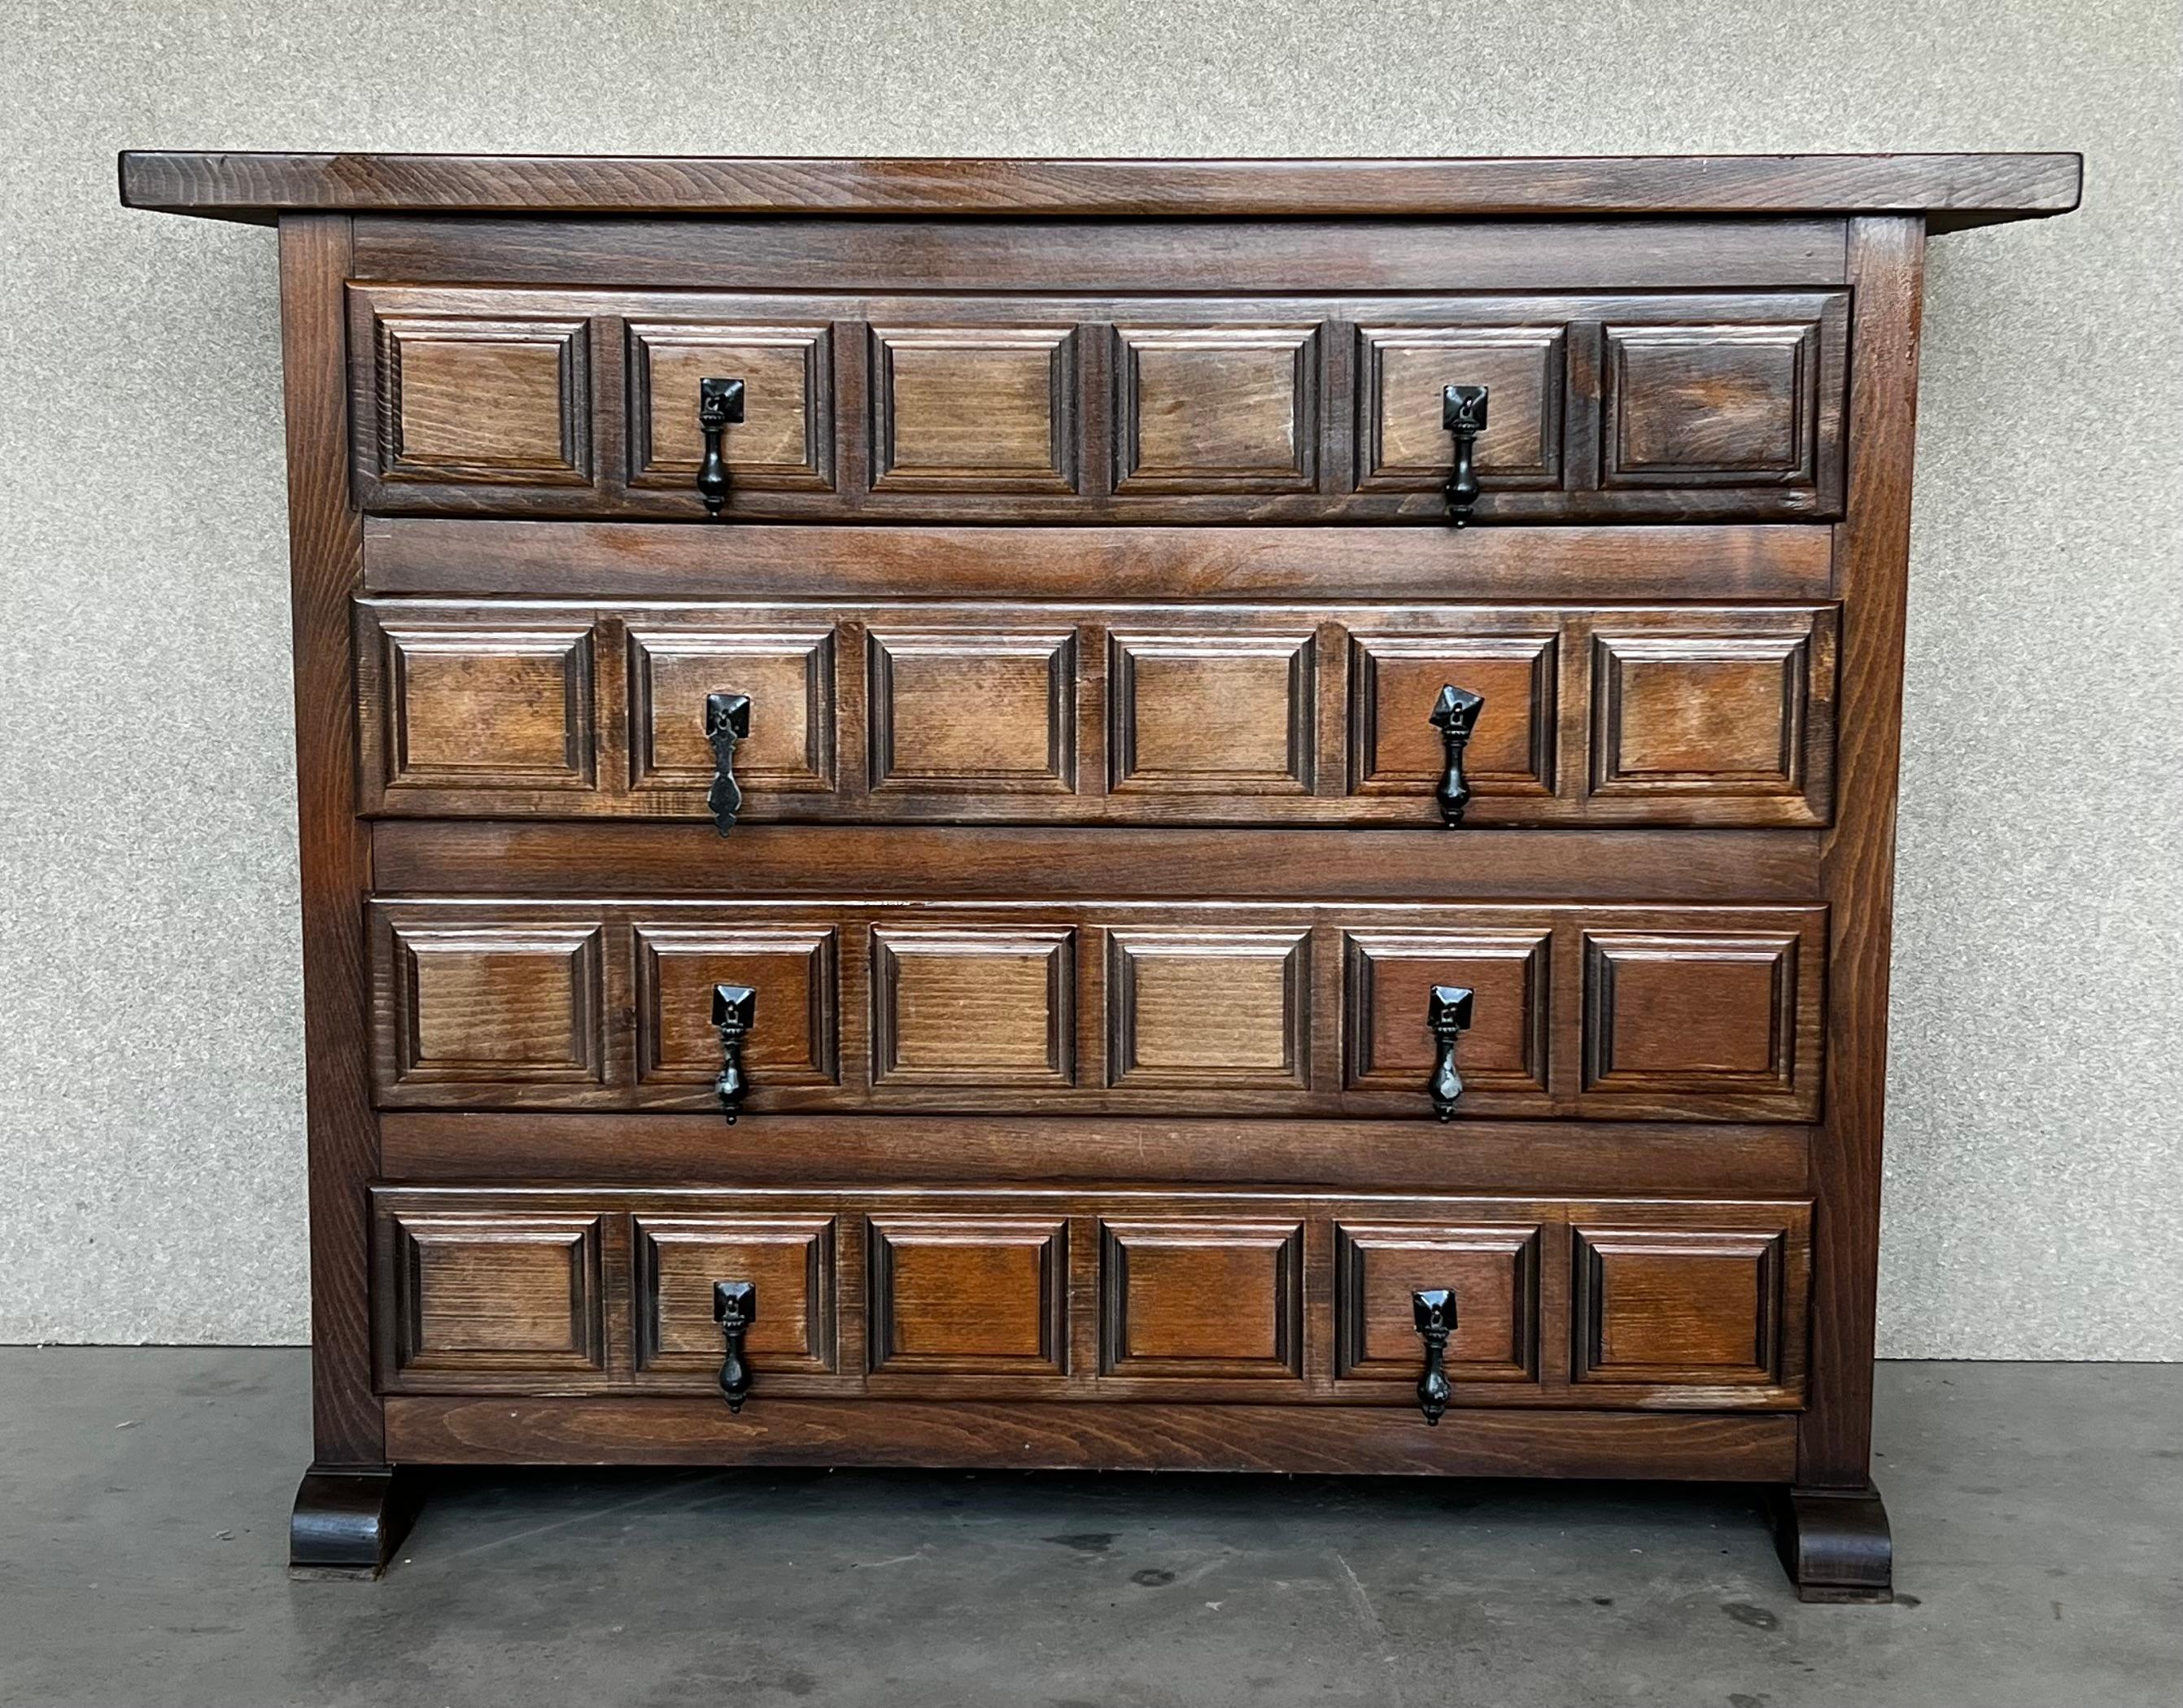 From Northern Spain, constructed of solid walnut, the rectangular top with molded edge atop a conforming case housing four drawers paneled with solid walnut, raised on pedestal legs.
Carved on the molding sides of the front and original iron